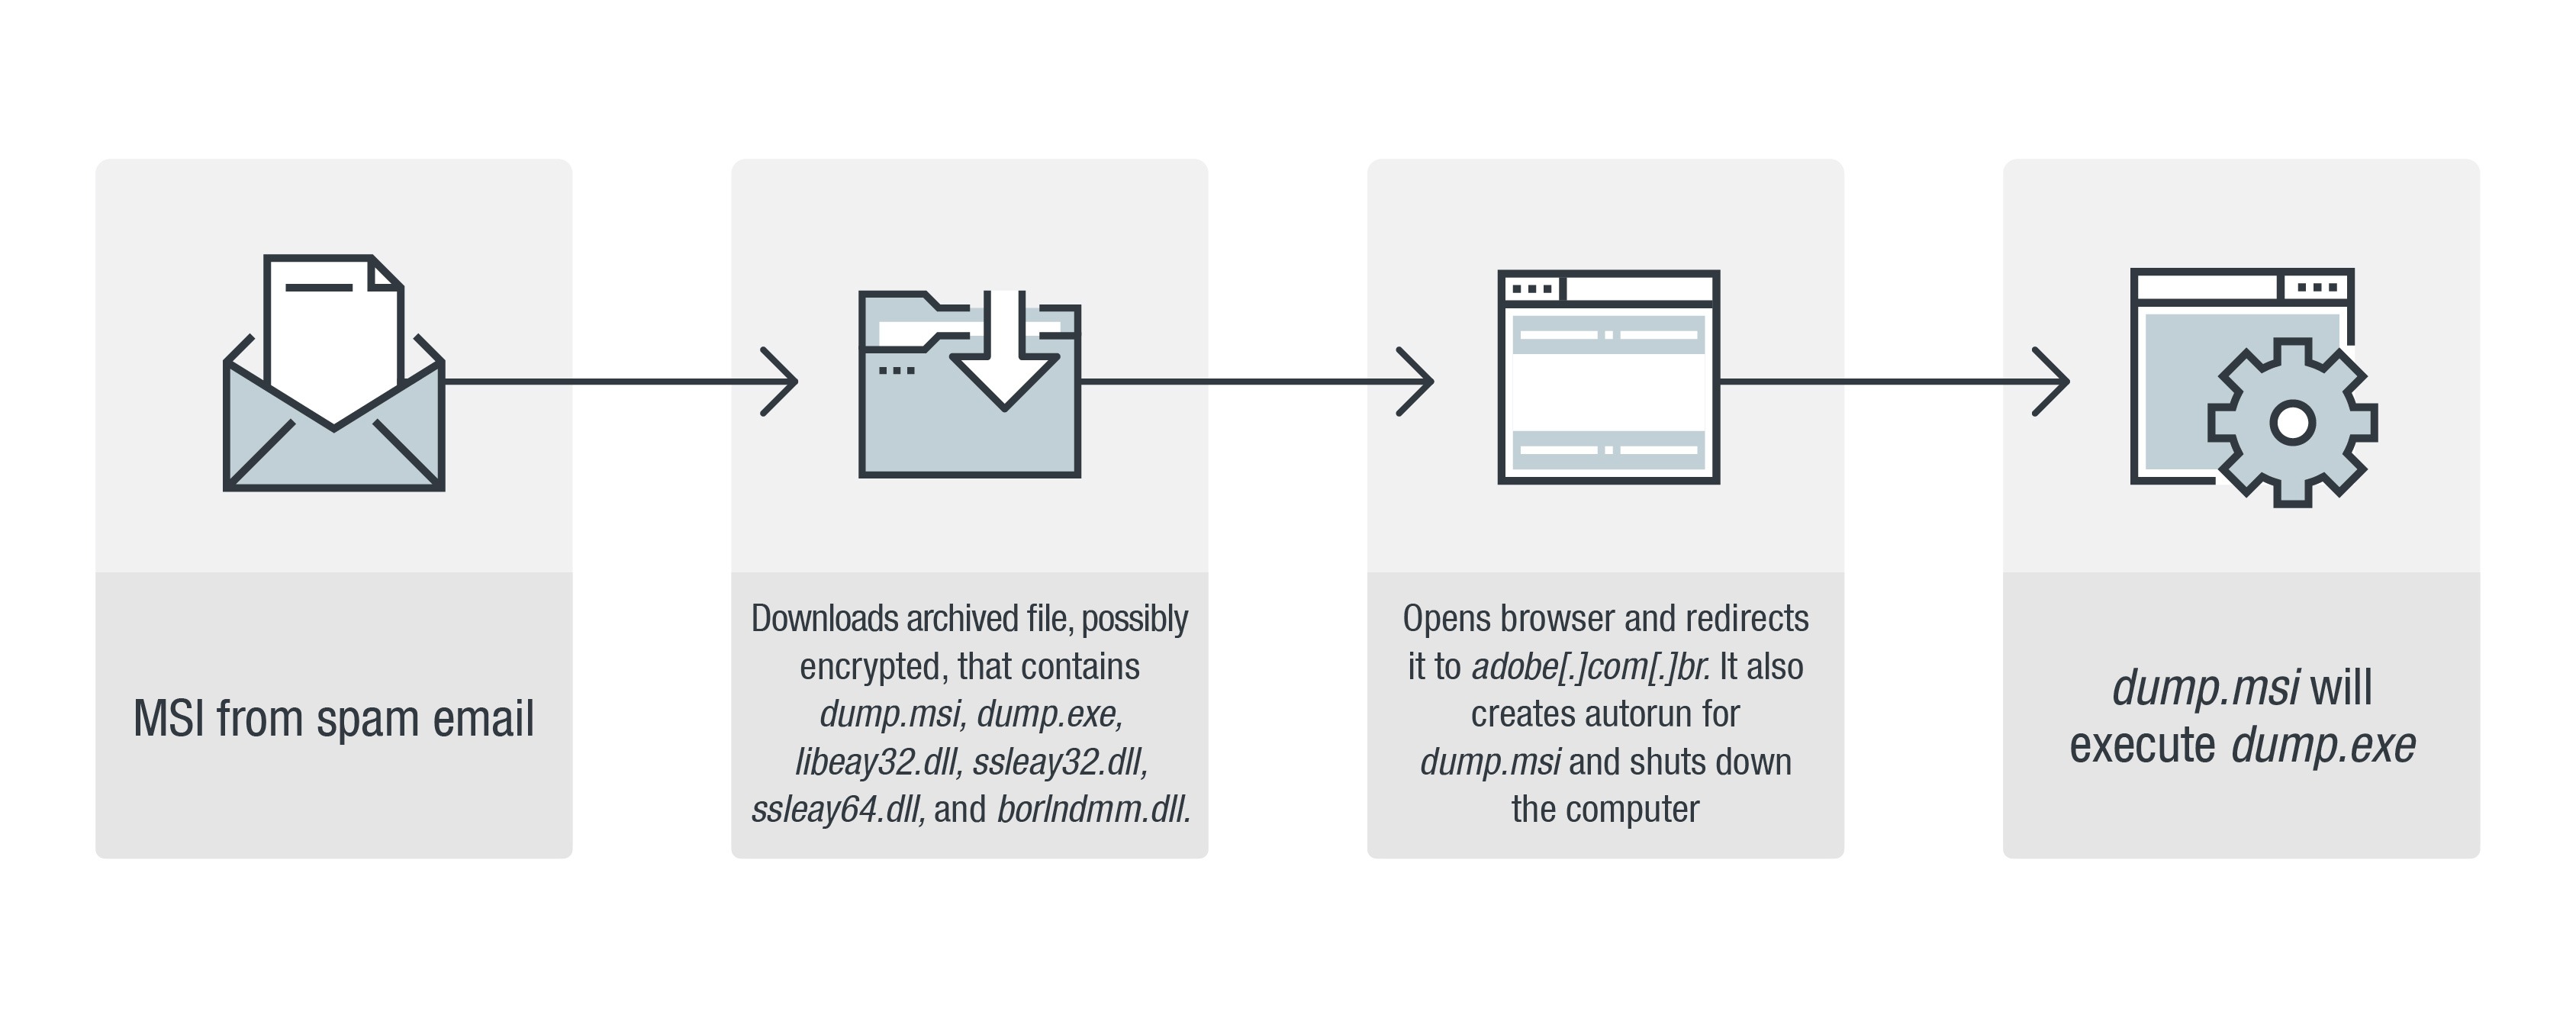 Figure 11. Malicious routine of the MSI in spammed email